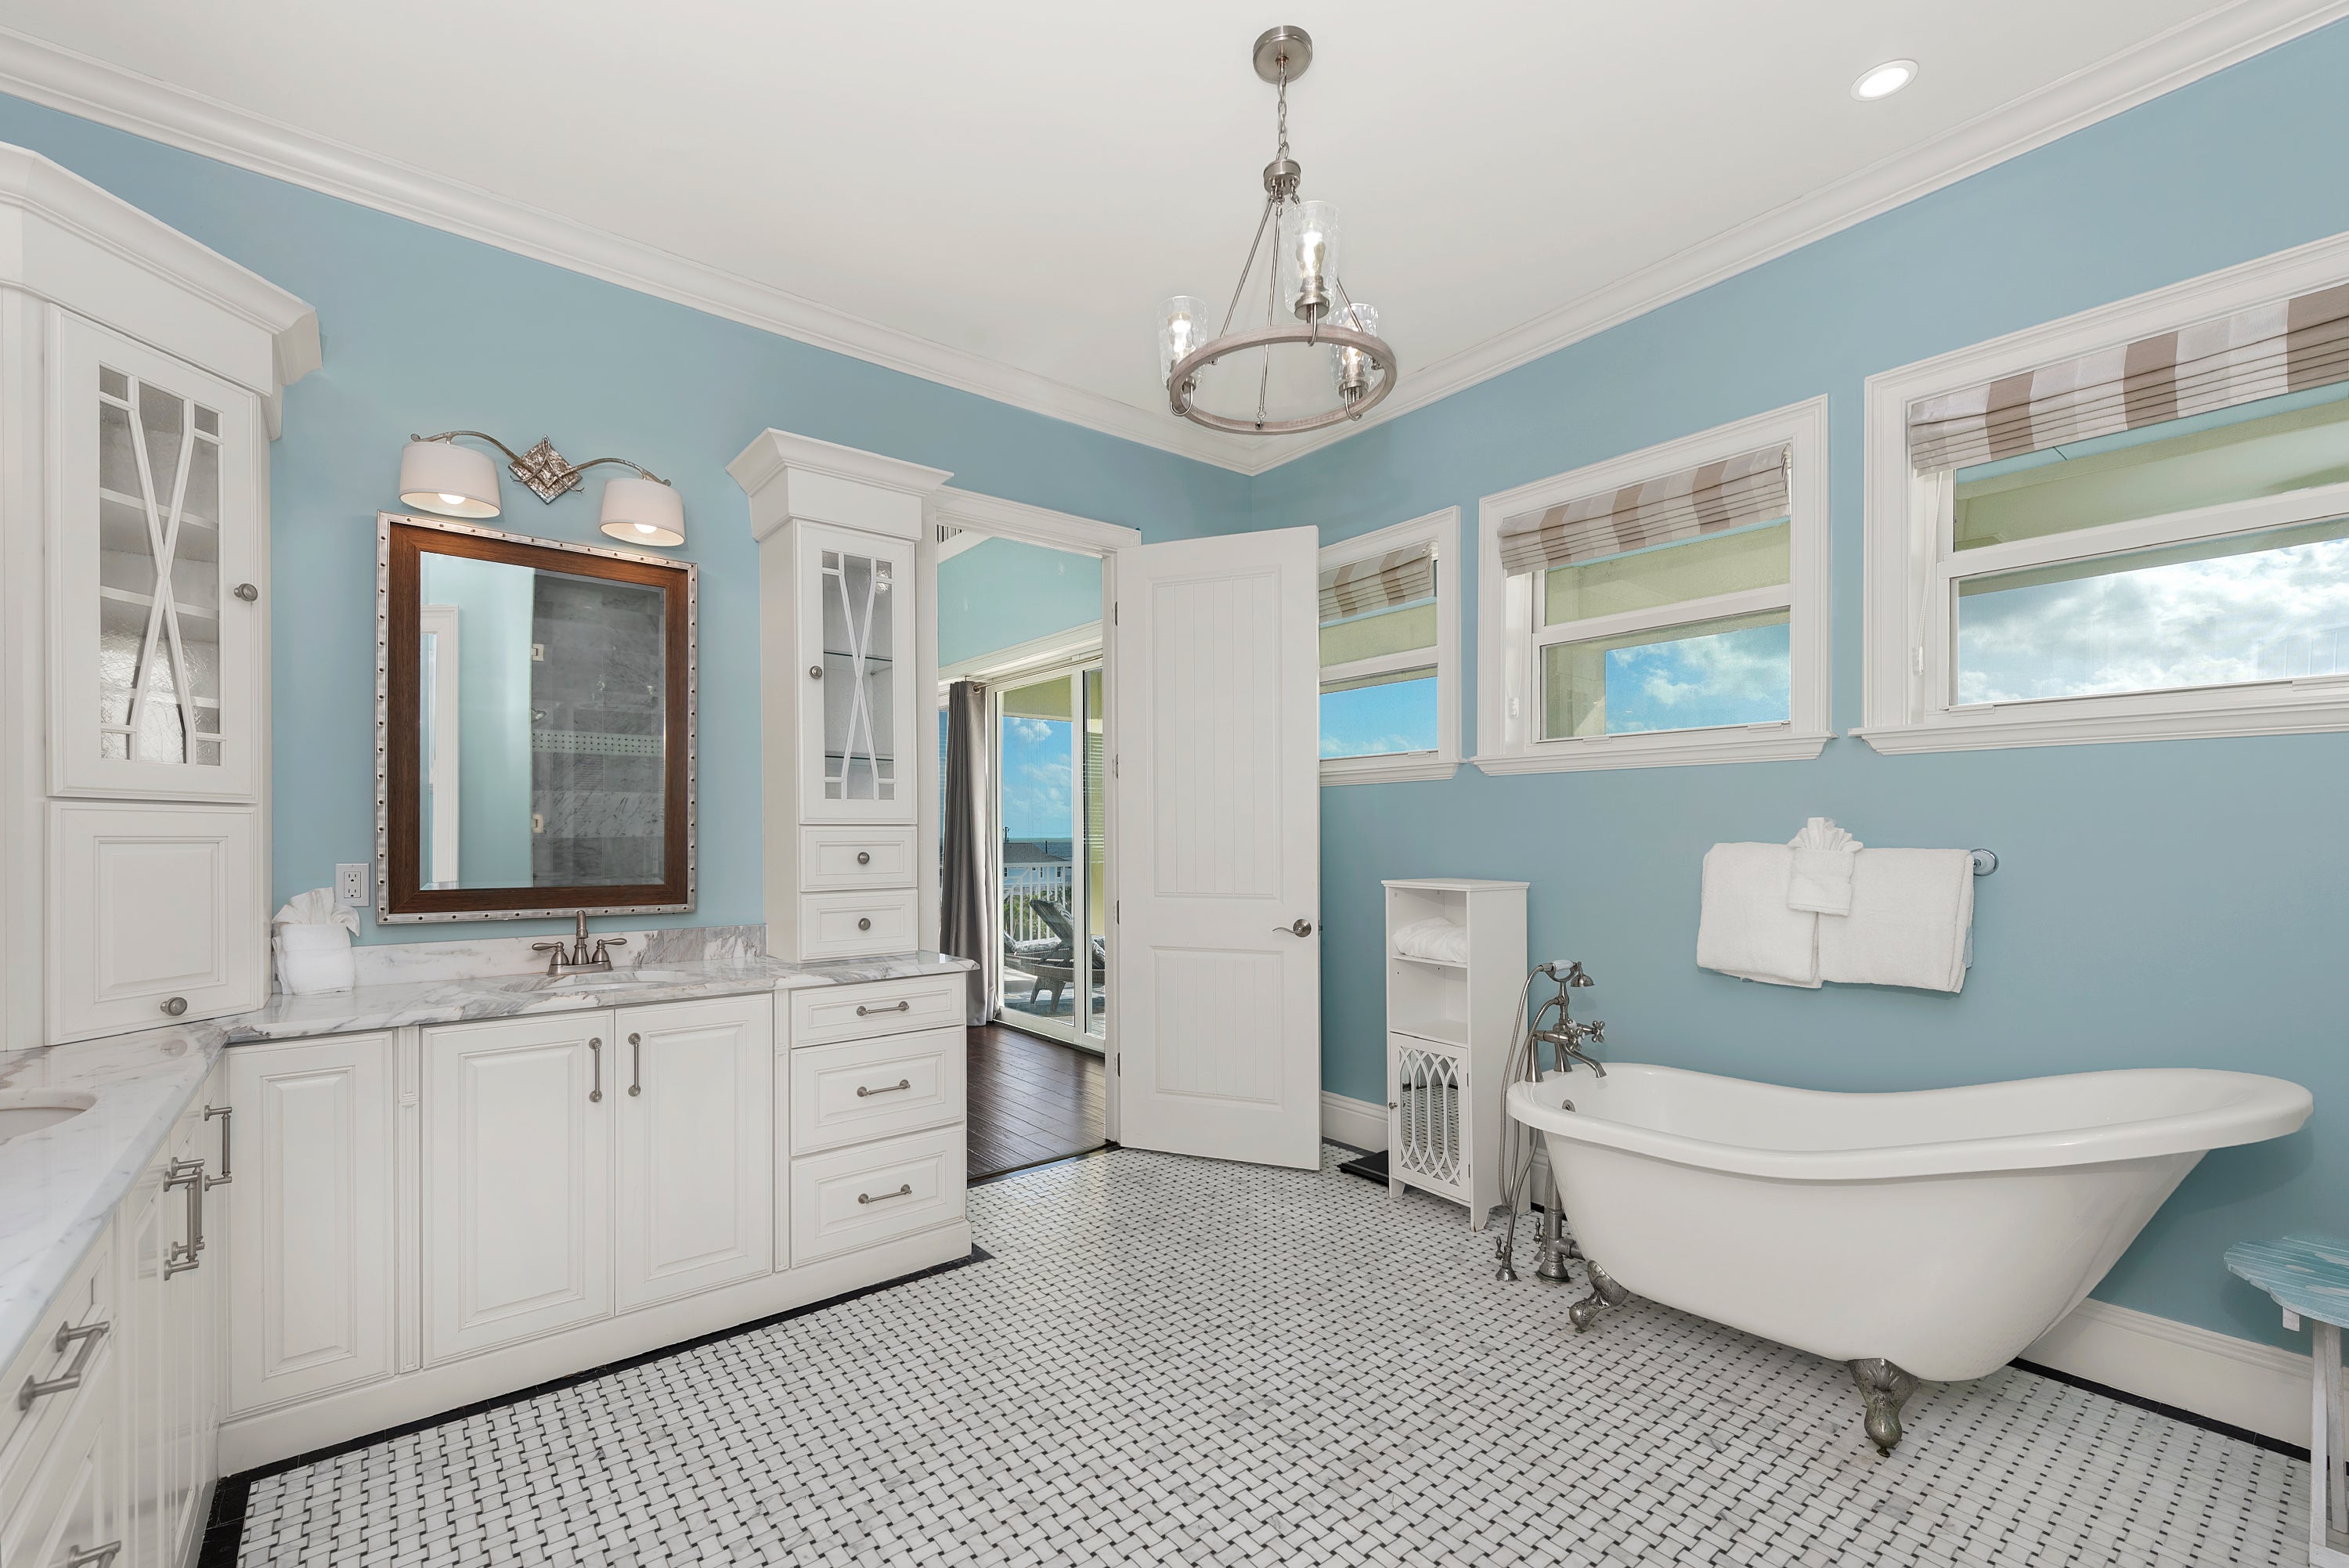 Primary King Bedroom Ensuite Bath with Soaking Tub